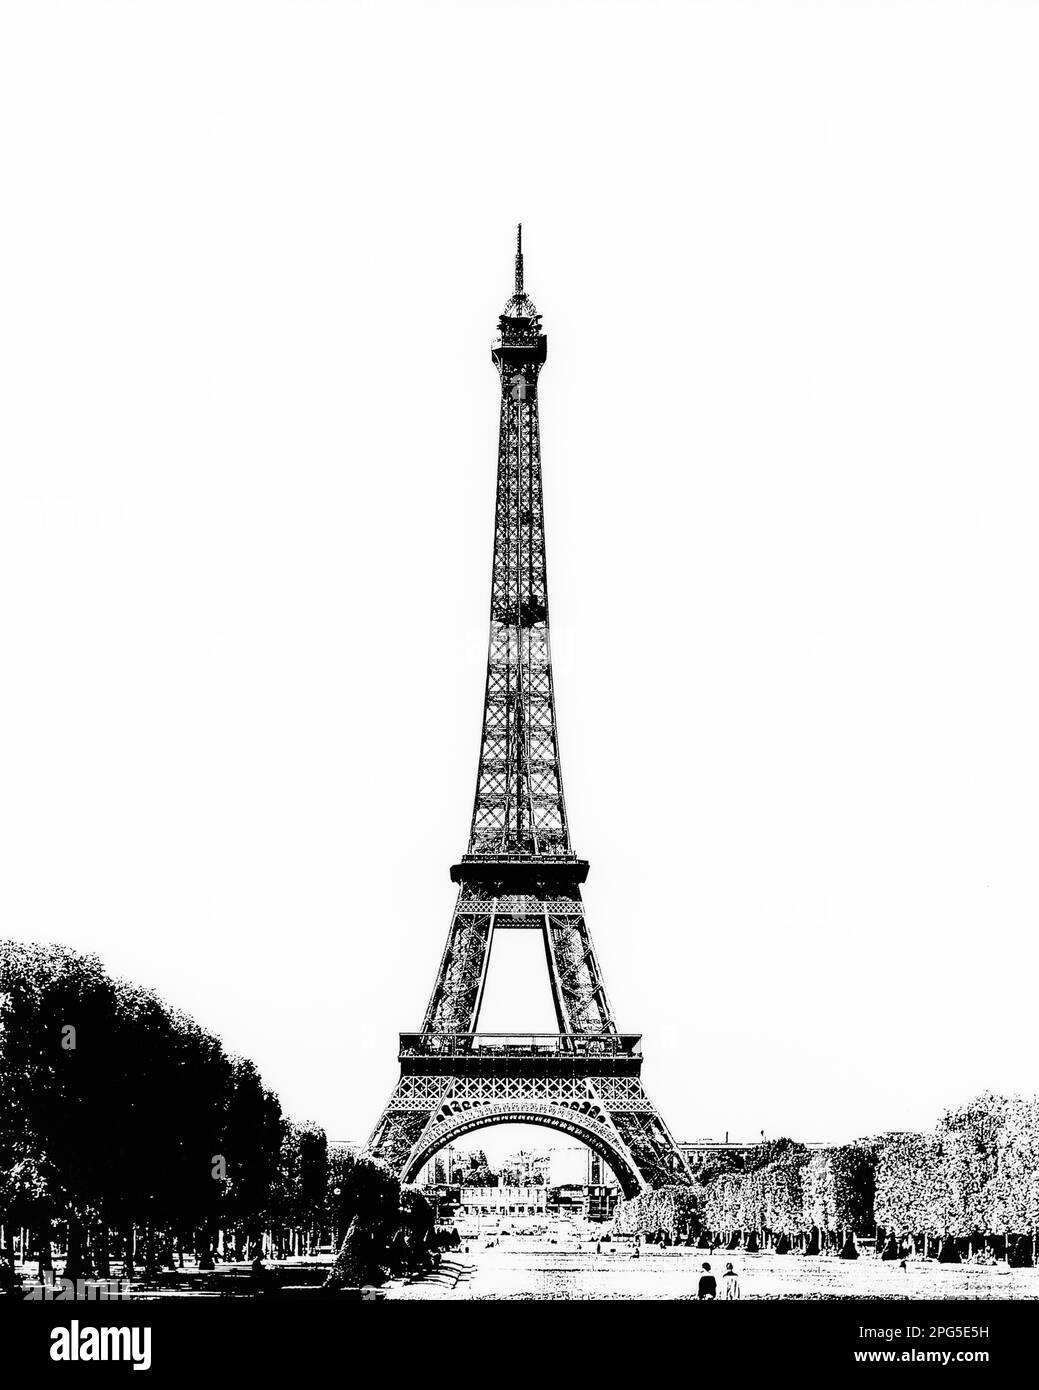 1970s HIGH CONTRAST ILLUSTRATION OF EIFFEL TOWER NORTH OF CHAMP DE MARS BUILT IN 1889 AS ENTRANCE TO WORLD’S FAIR PARIS FRANCE  - r23331 HAR001 HARS STRUCTURE ADVENTURE EUROPEAN PROPERTY WORLD'S EXTERIOR 1889 PRIDE REAL ESTATE CONCEPT LATTICE CONCEPTUAL DE STRUCTURES CONTRAST CULTURAL ICON EDIFICE CHAMP CHAMP DE MARS SYMBOLIC ALEXANDRE GUSTAVE EIFFEL BUILT CONCEPTS MARS TOURIST ATTRACTION BLACK AND WHITE EIFFEL TOWER HAR001 ICONIC LANDMARK OLD FASHIONED POSTERIZED REPRESENTATION Stock Photo